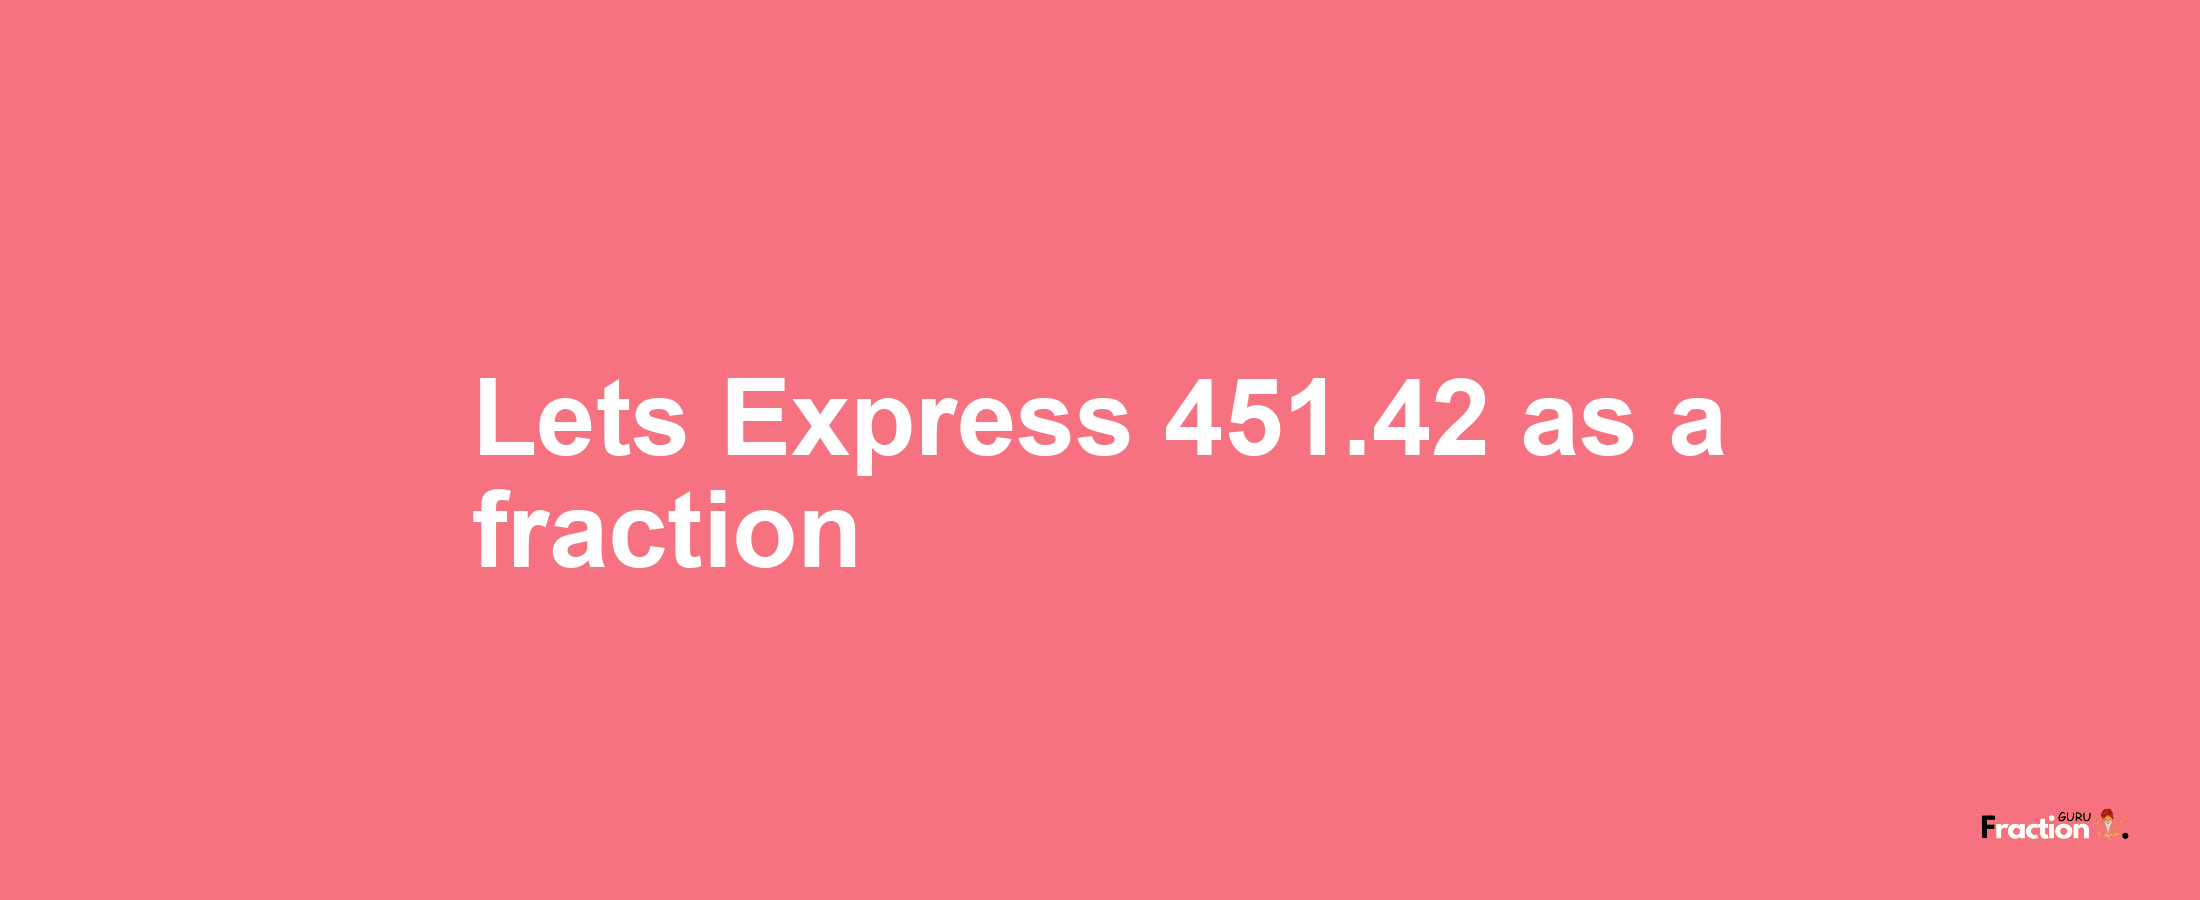 Lets Express 451.42 as afraction